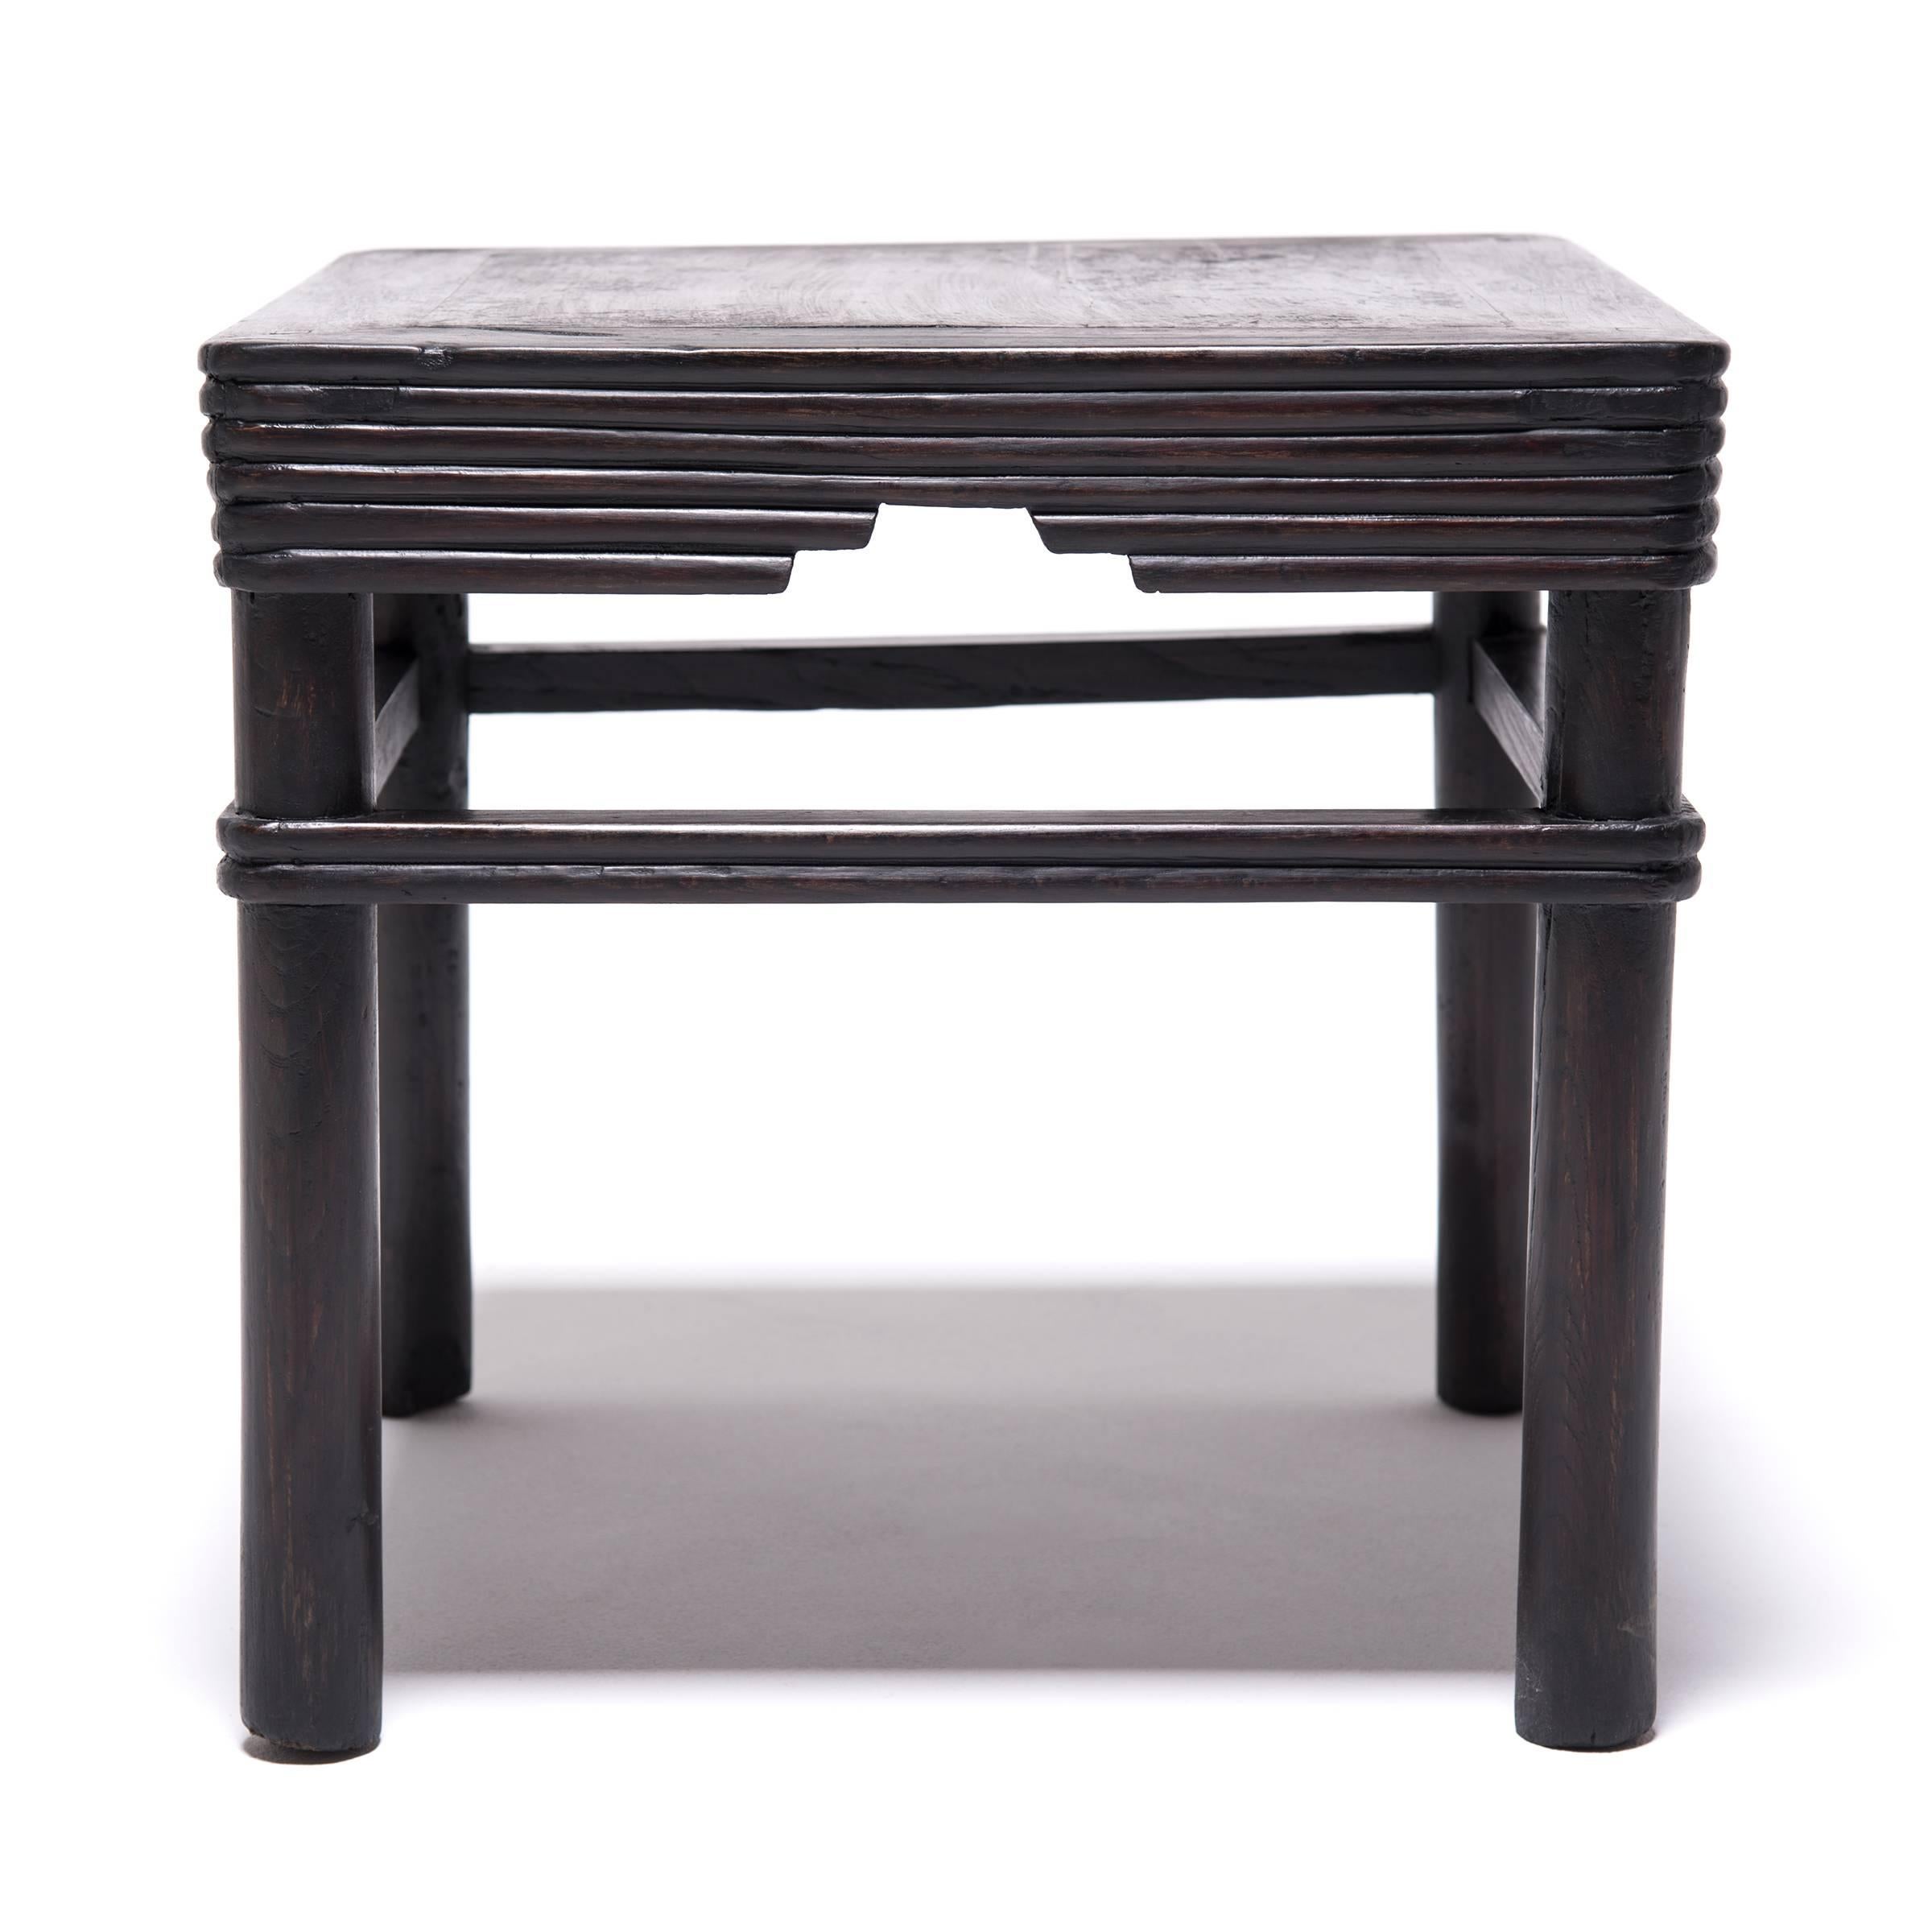 Qing Chinese Black Lacquer Square Stool, c. 1850